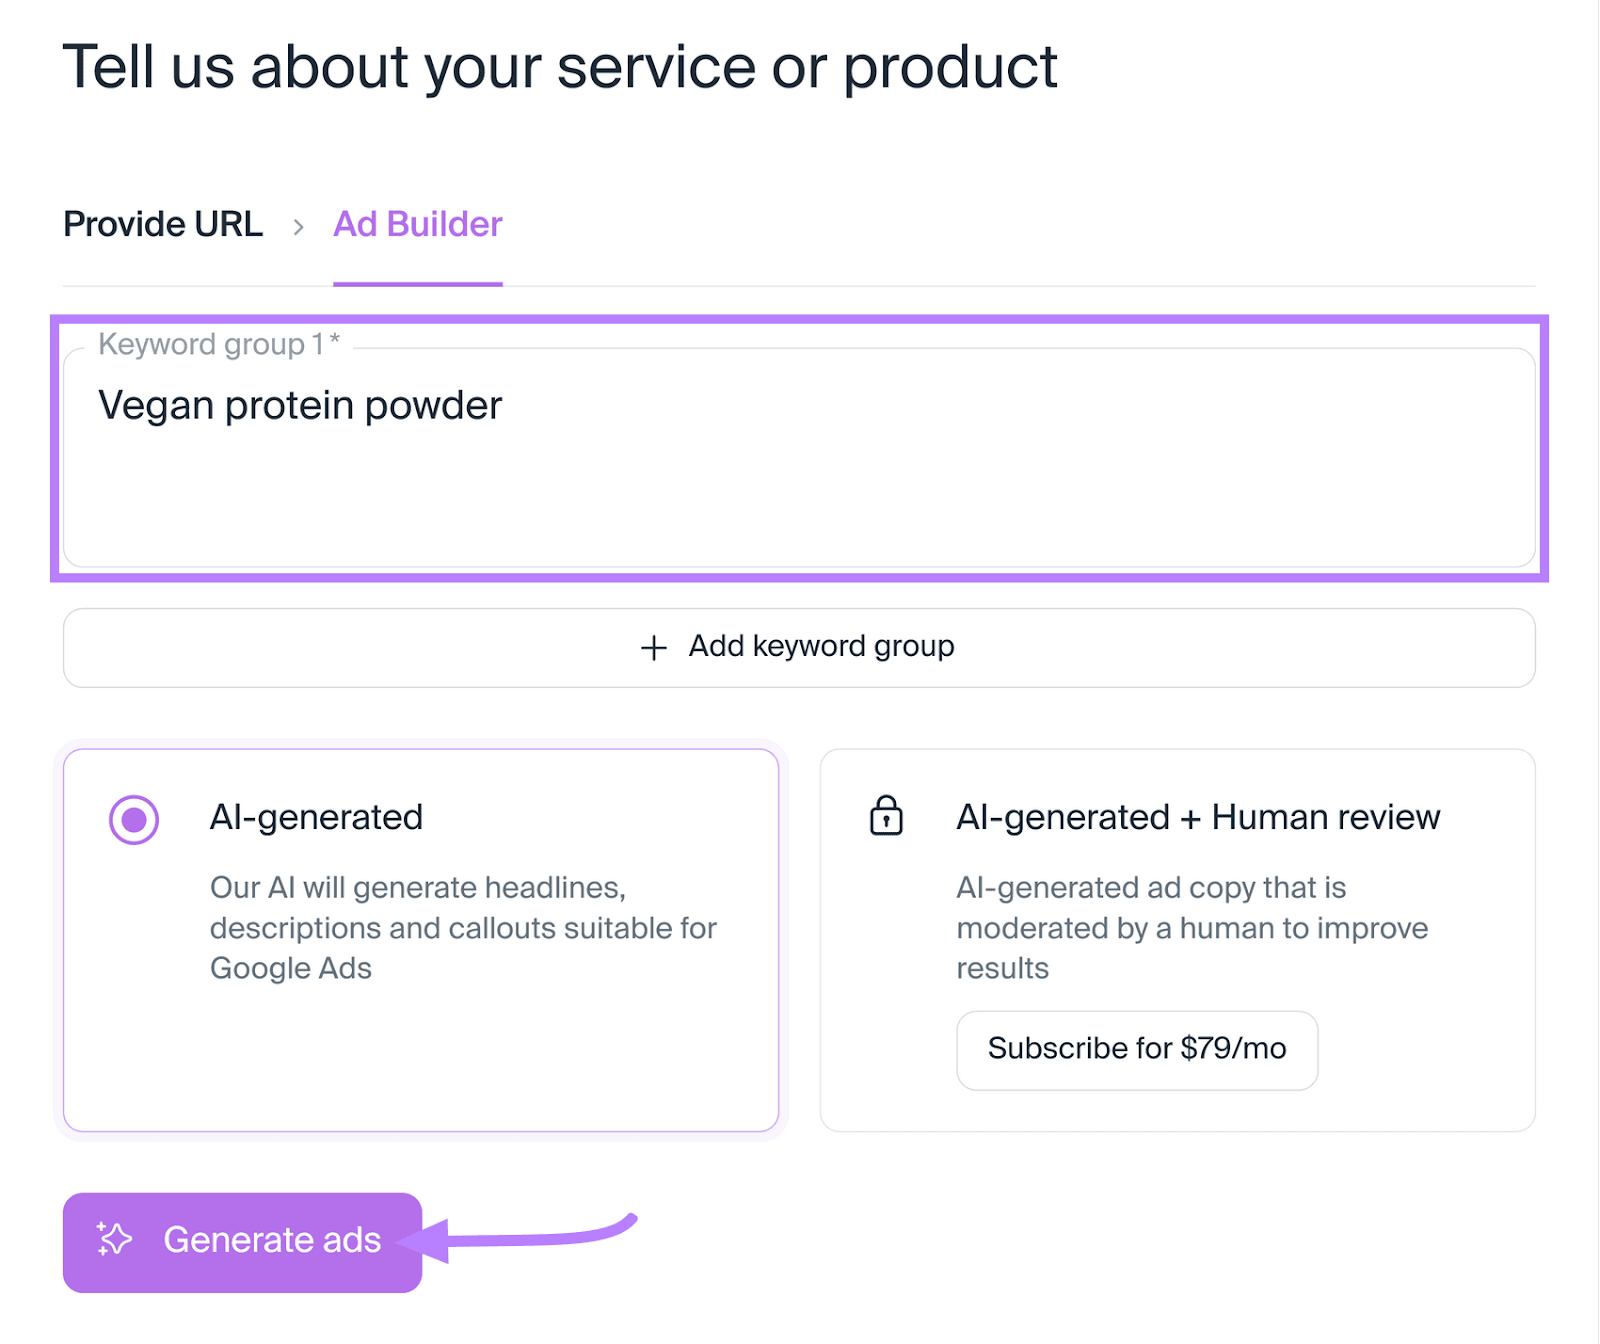 "Keyword group 1" field highlighted under "Tell us about your service or product" window in AI Ad Copy Generator